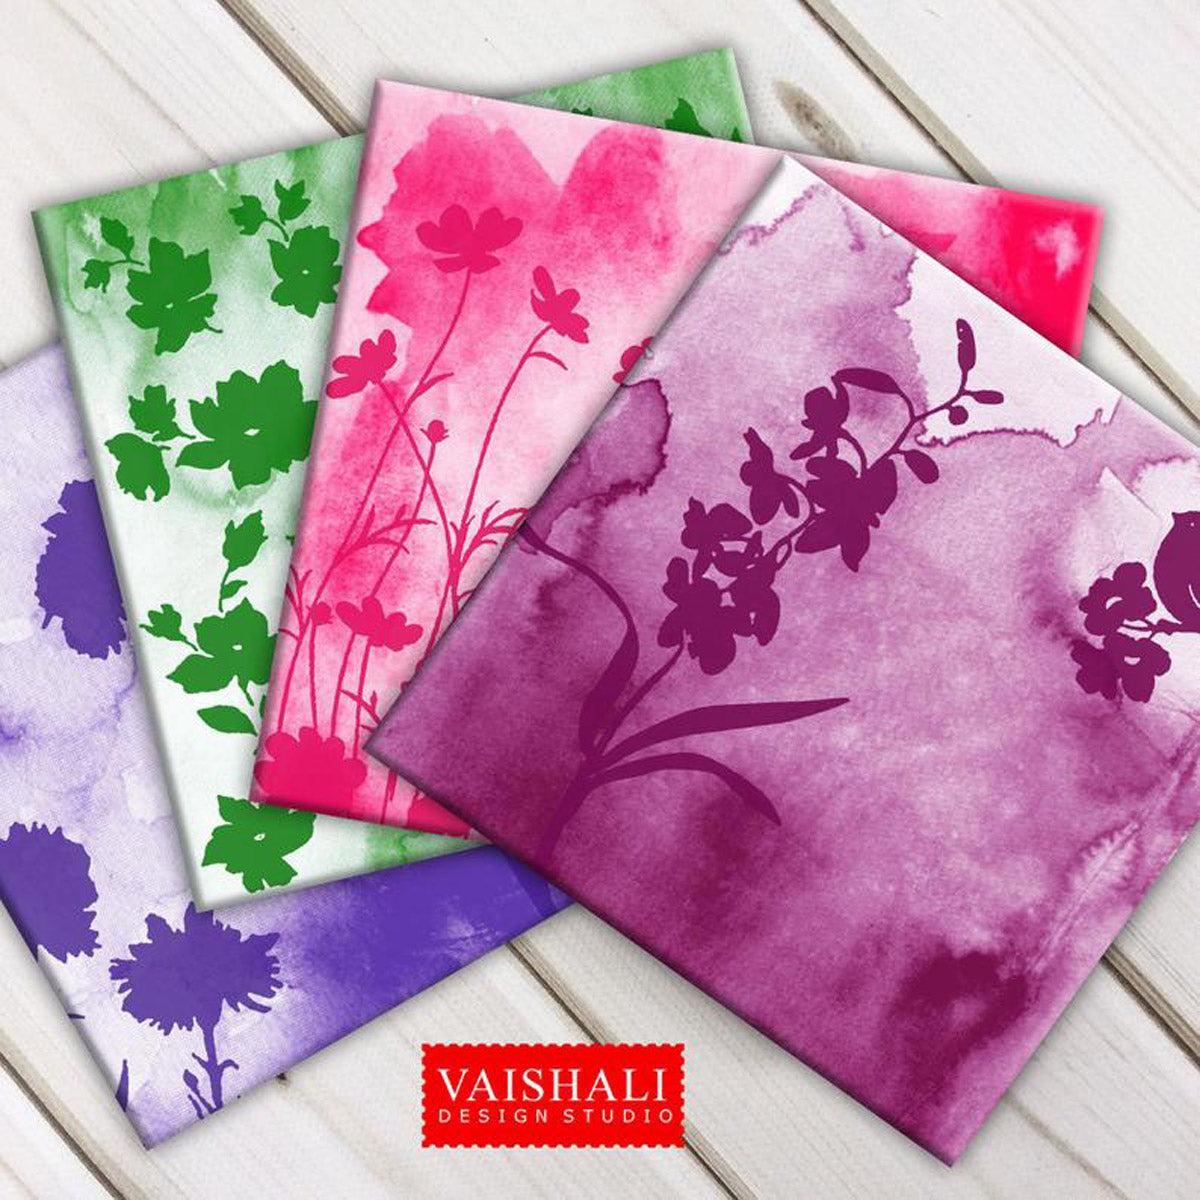 Monochromatic texture,floral silhouette, printable coasters, set of 4 designs, 3.8" x 3.8"